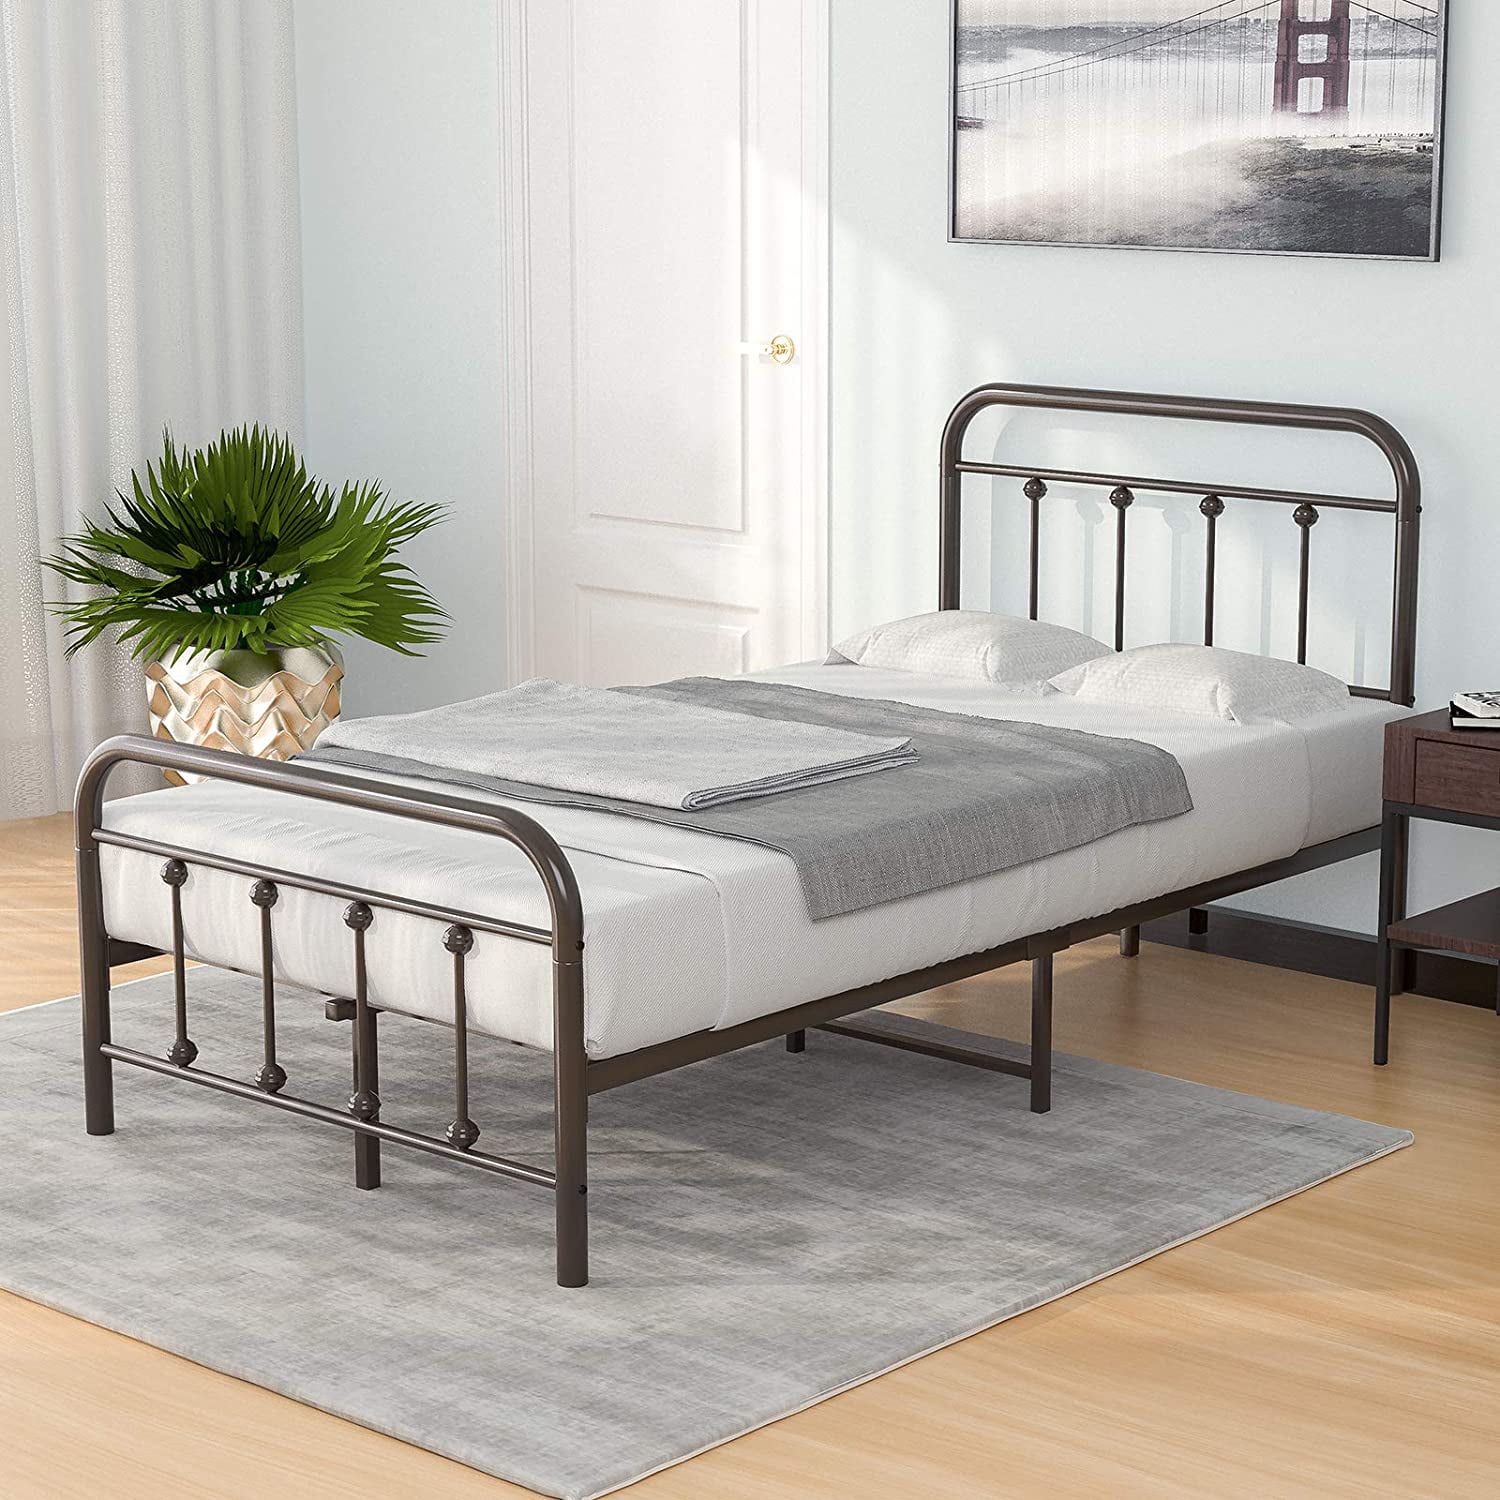 Mecor Metal Twin Bed Frame With Vintage, Antique Wooden Twin Bed Frames